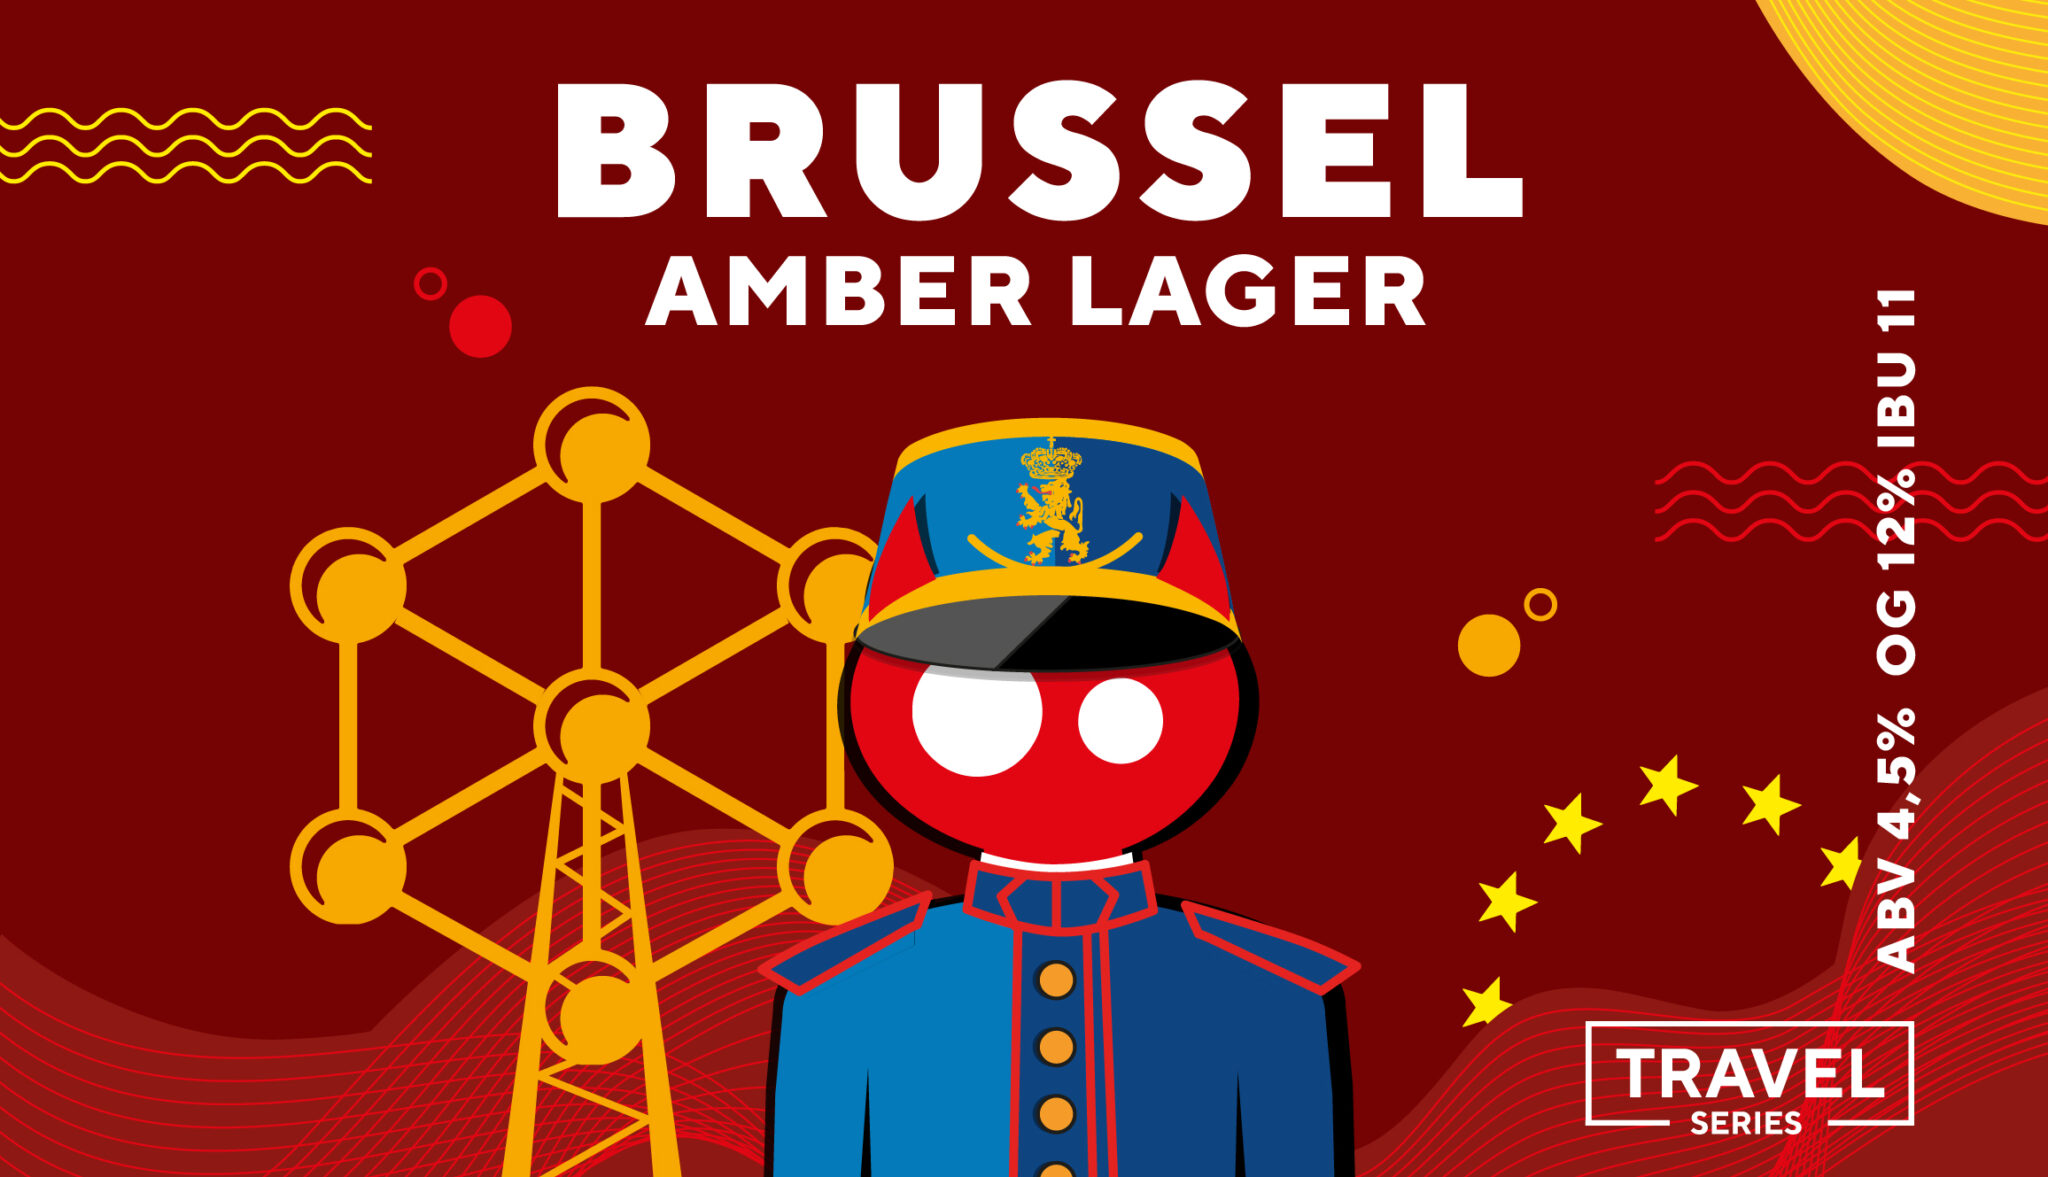 Brussel (Red Cat Brewery)